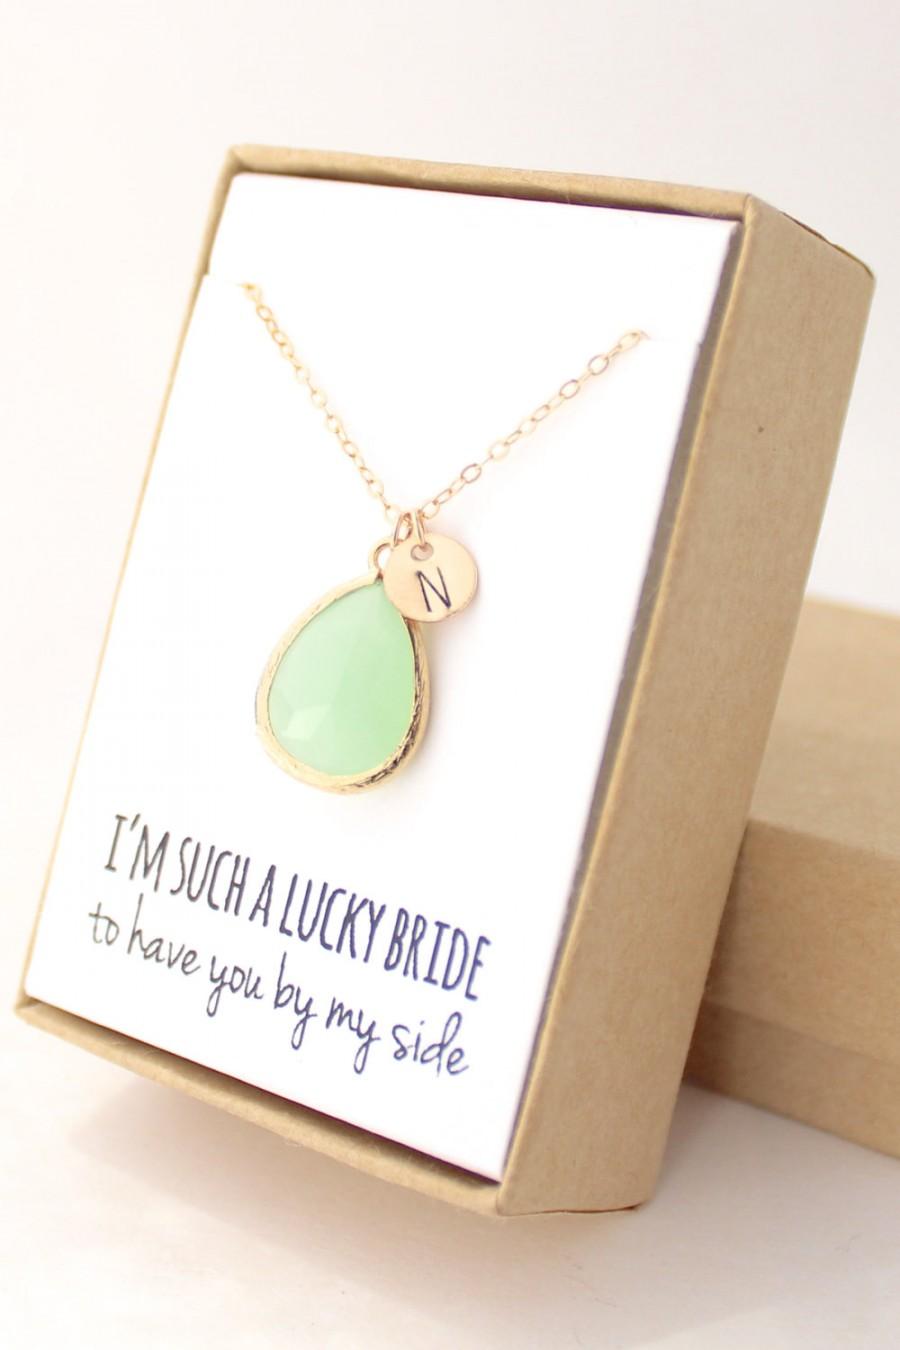 Wedding - Light Mint / Gold Teardrop Necklace - Mint Bridesmaid Necklace - Bridesmaid Gift Jewelry - Mint and Gold Necklace - NB1